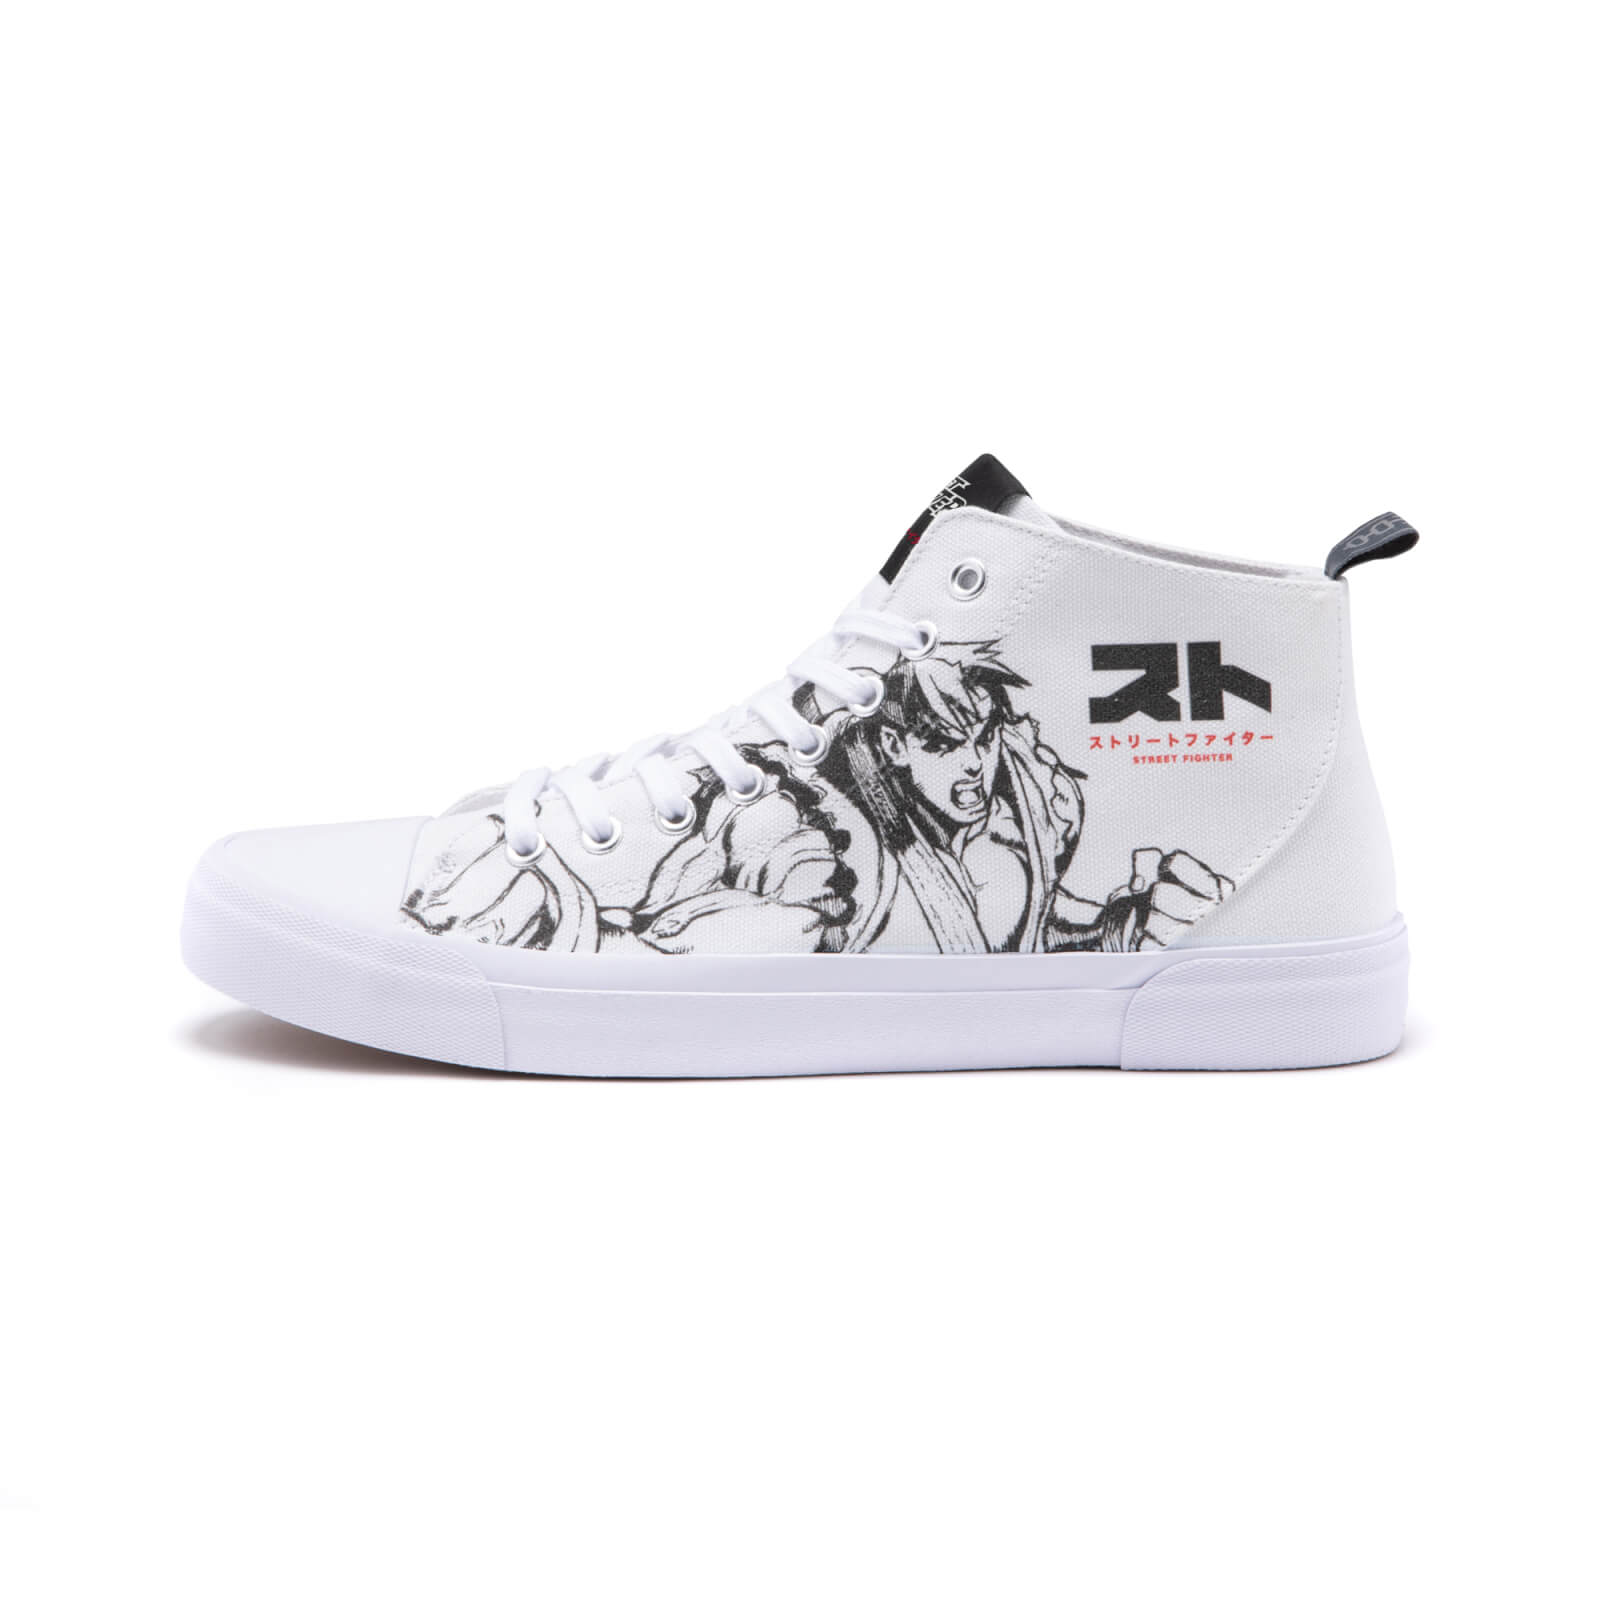 Chaussures Blanches Coupe Haute Akedo x Street Fighter - UK3 / EU35.5